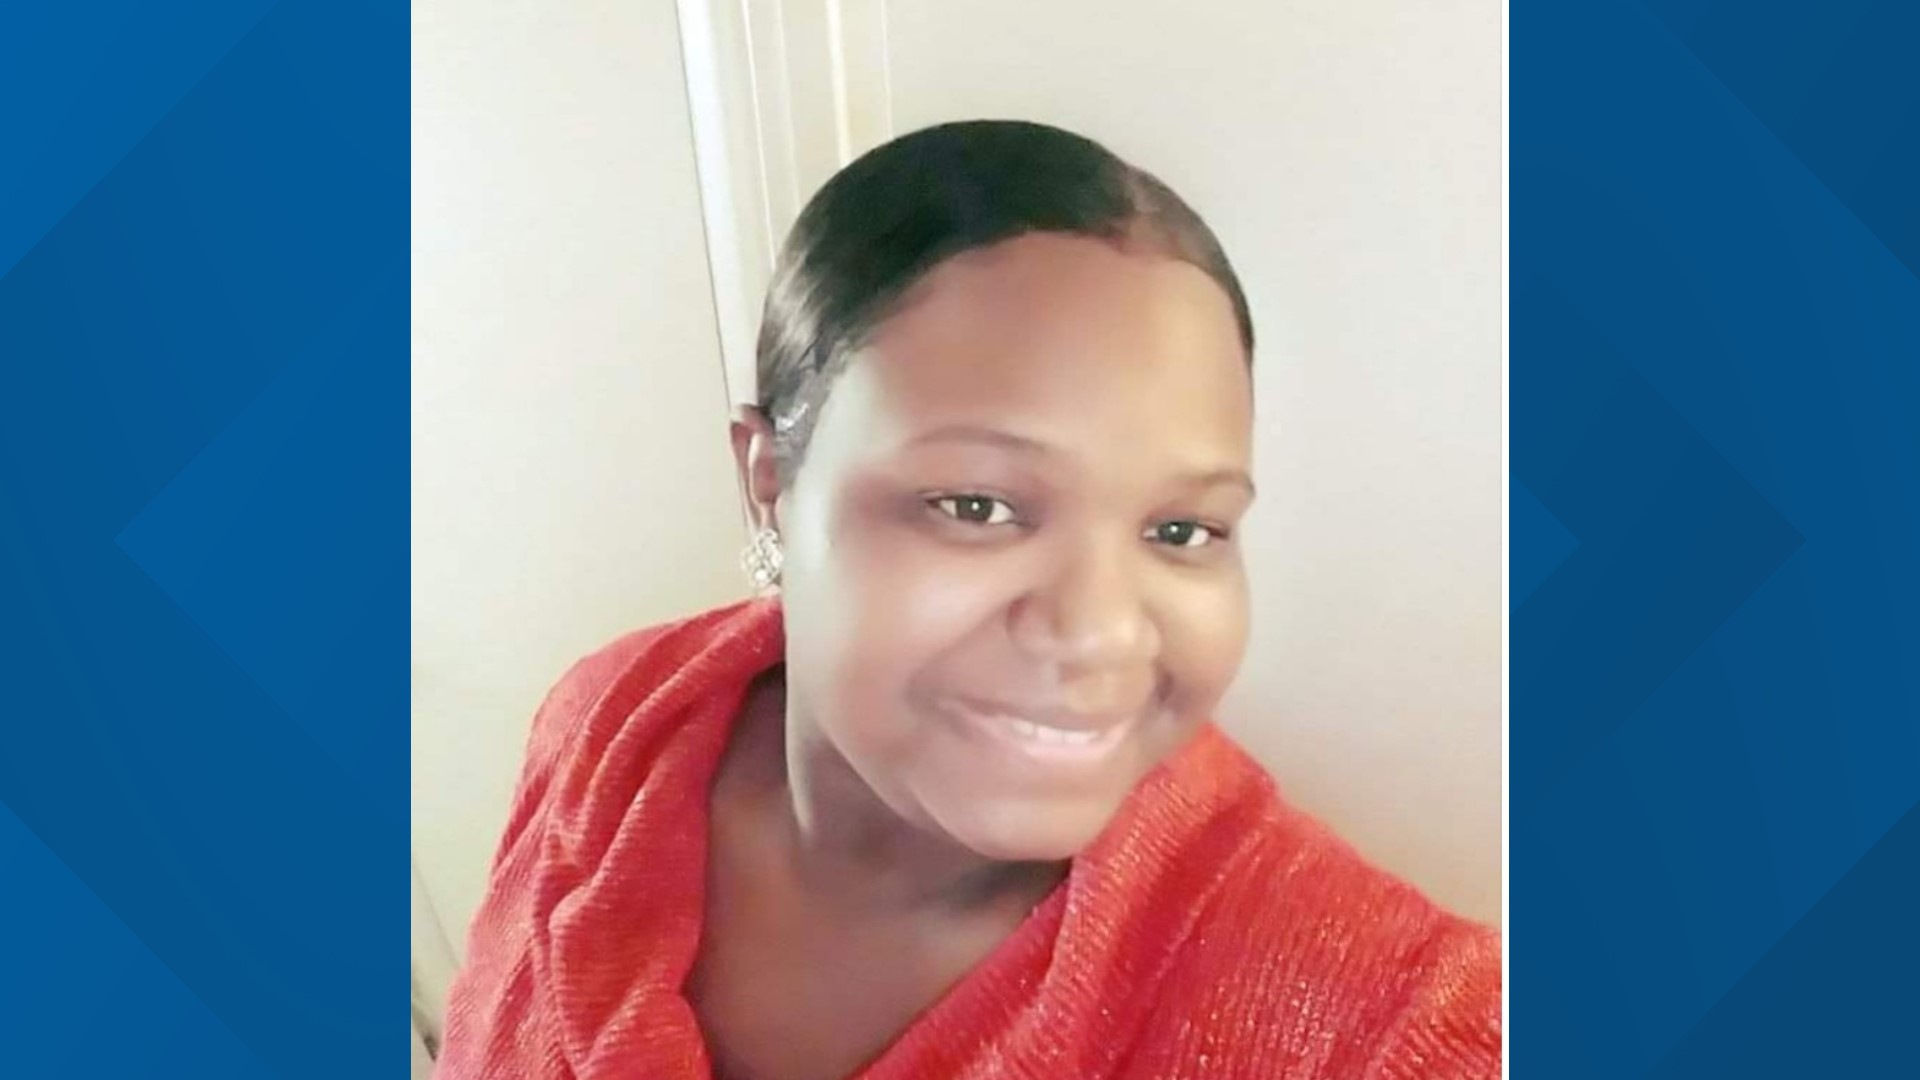 Her family said 43-year-old Shanetta Wilson's death serves as a tragic reminder that the pandemic isn't over.